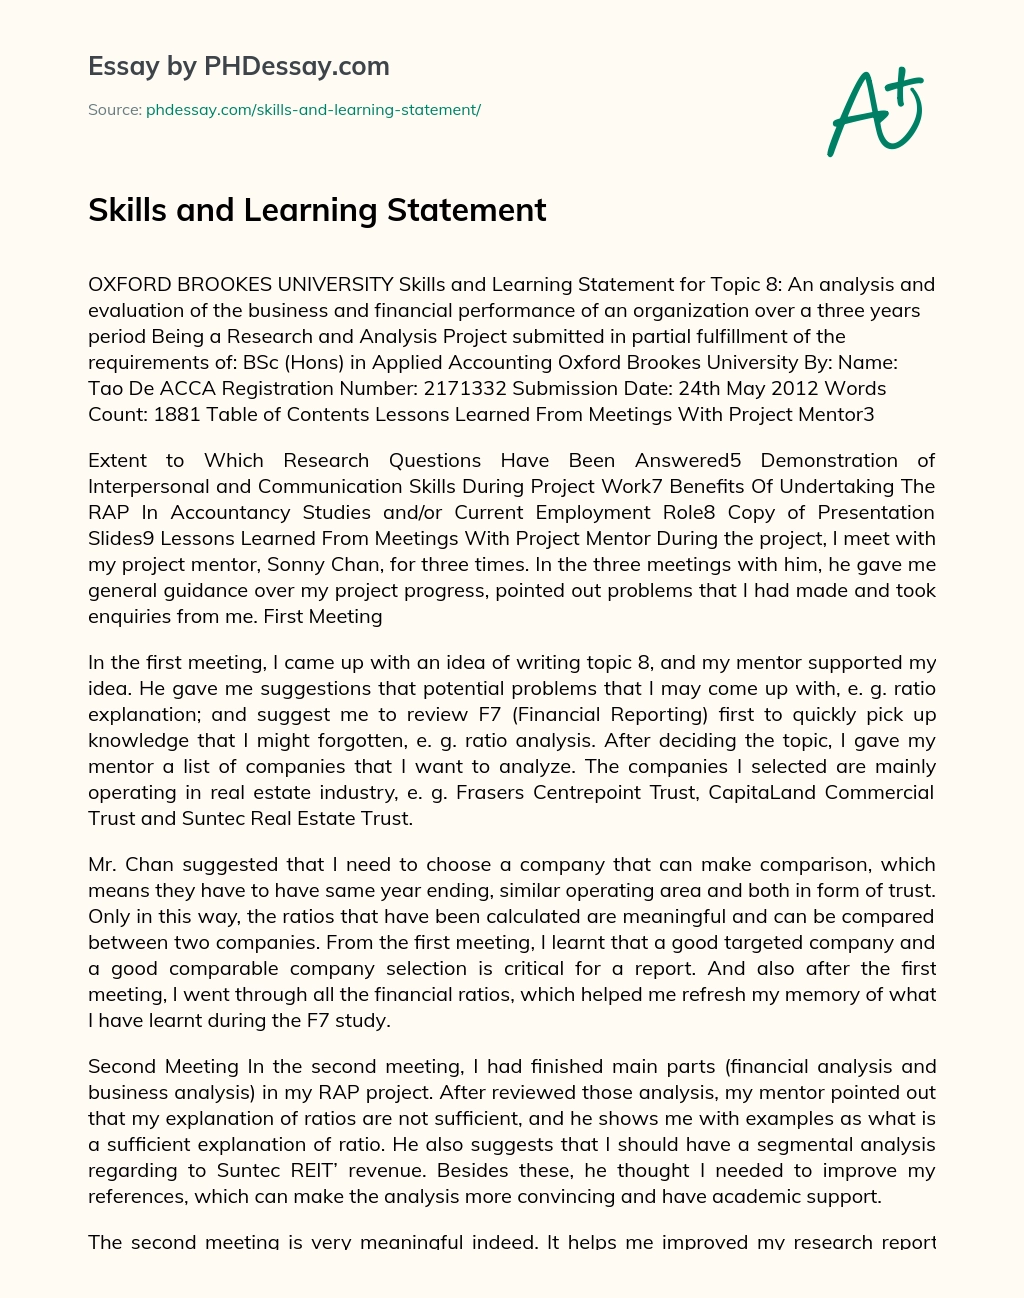 Skills and Learning Statement essay